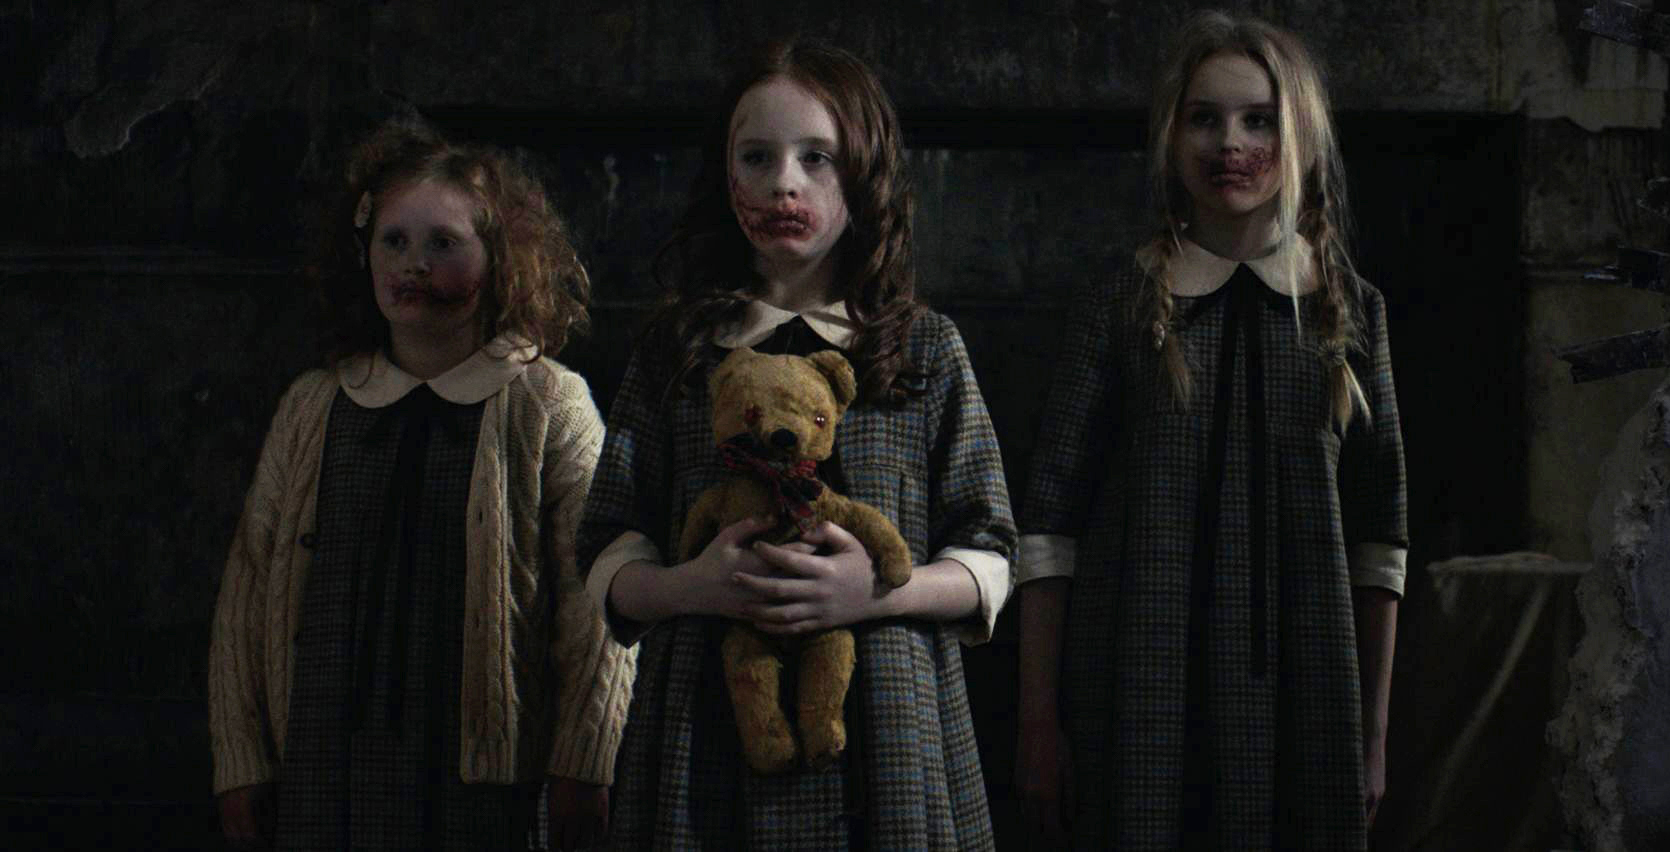 More like a DEADy bear for these ghastly little girls!!!!!!11!